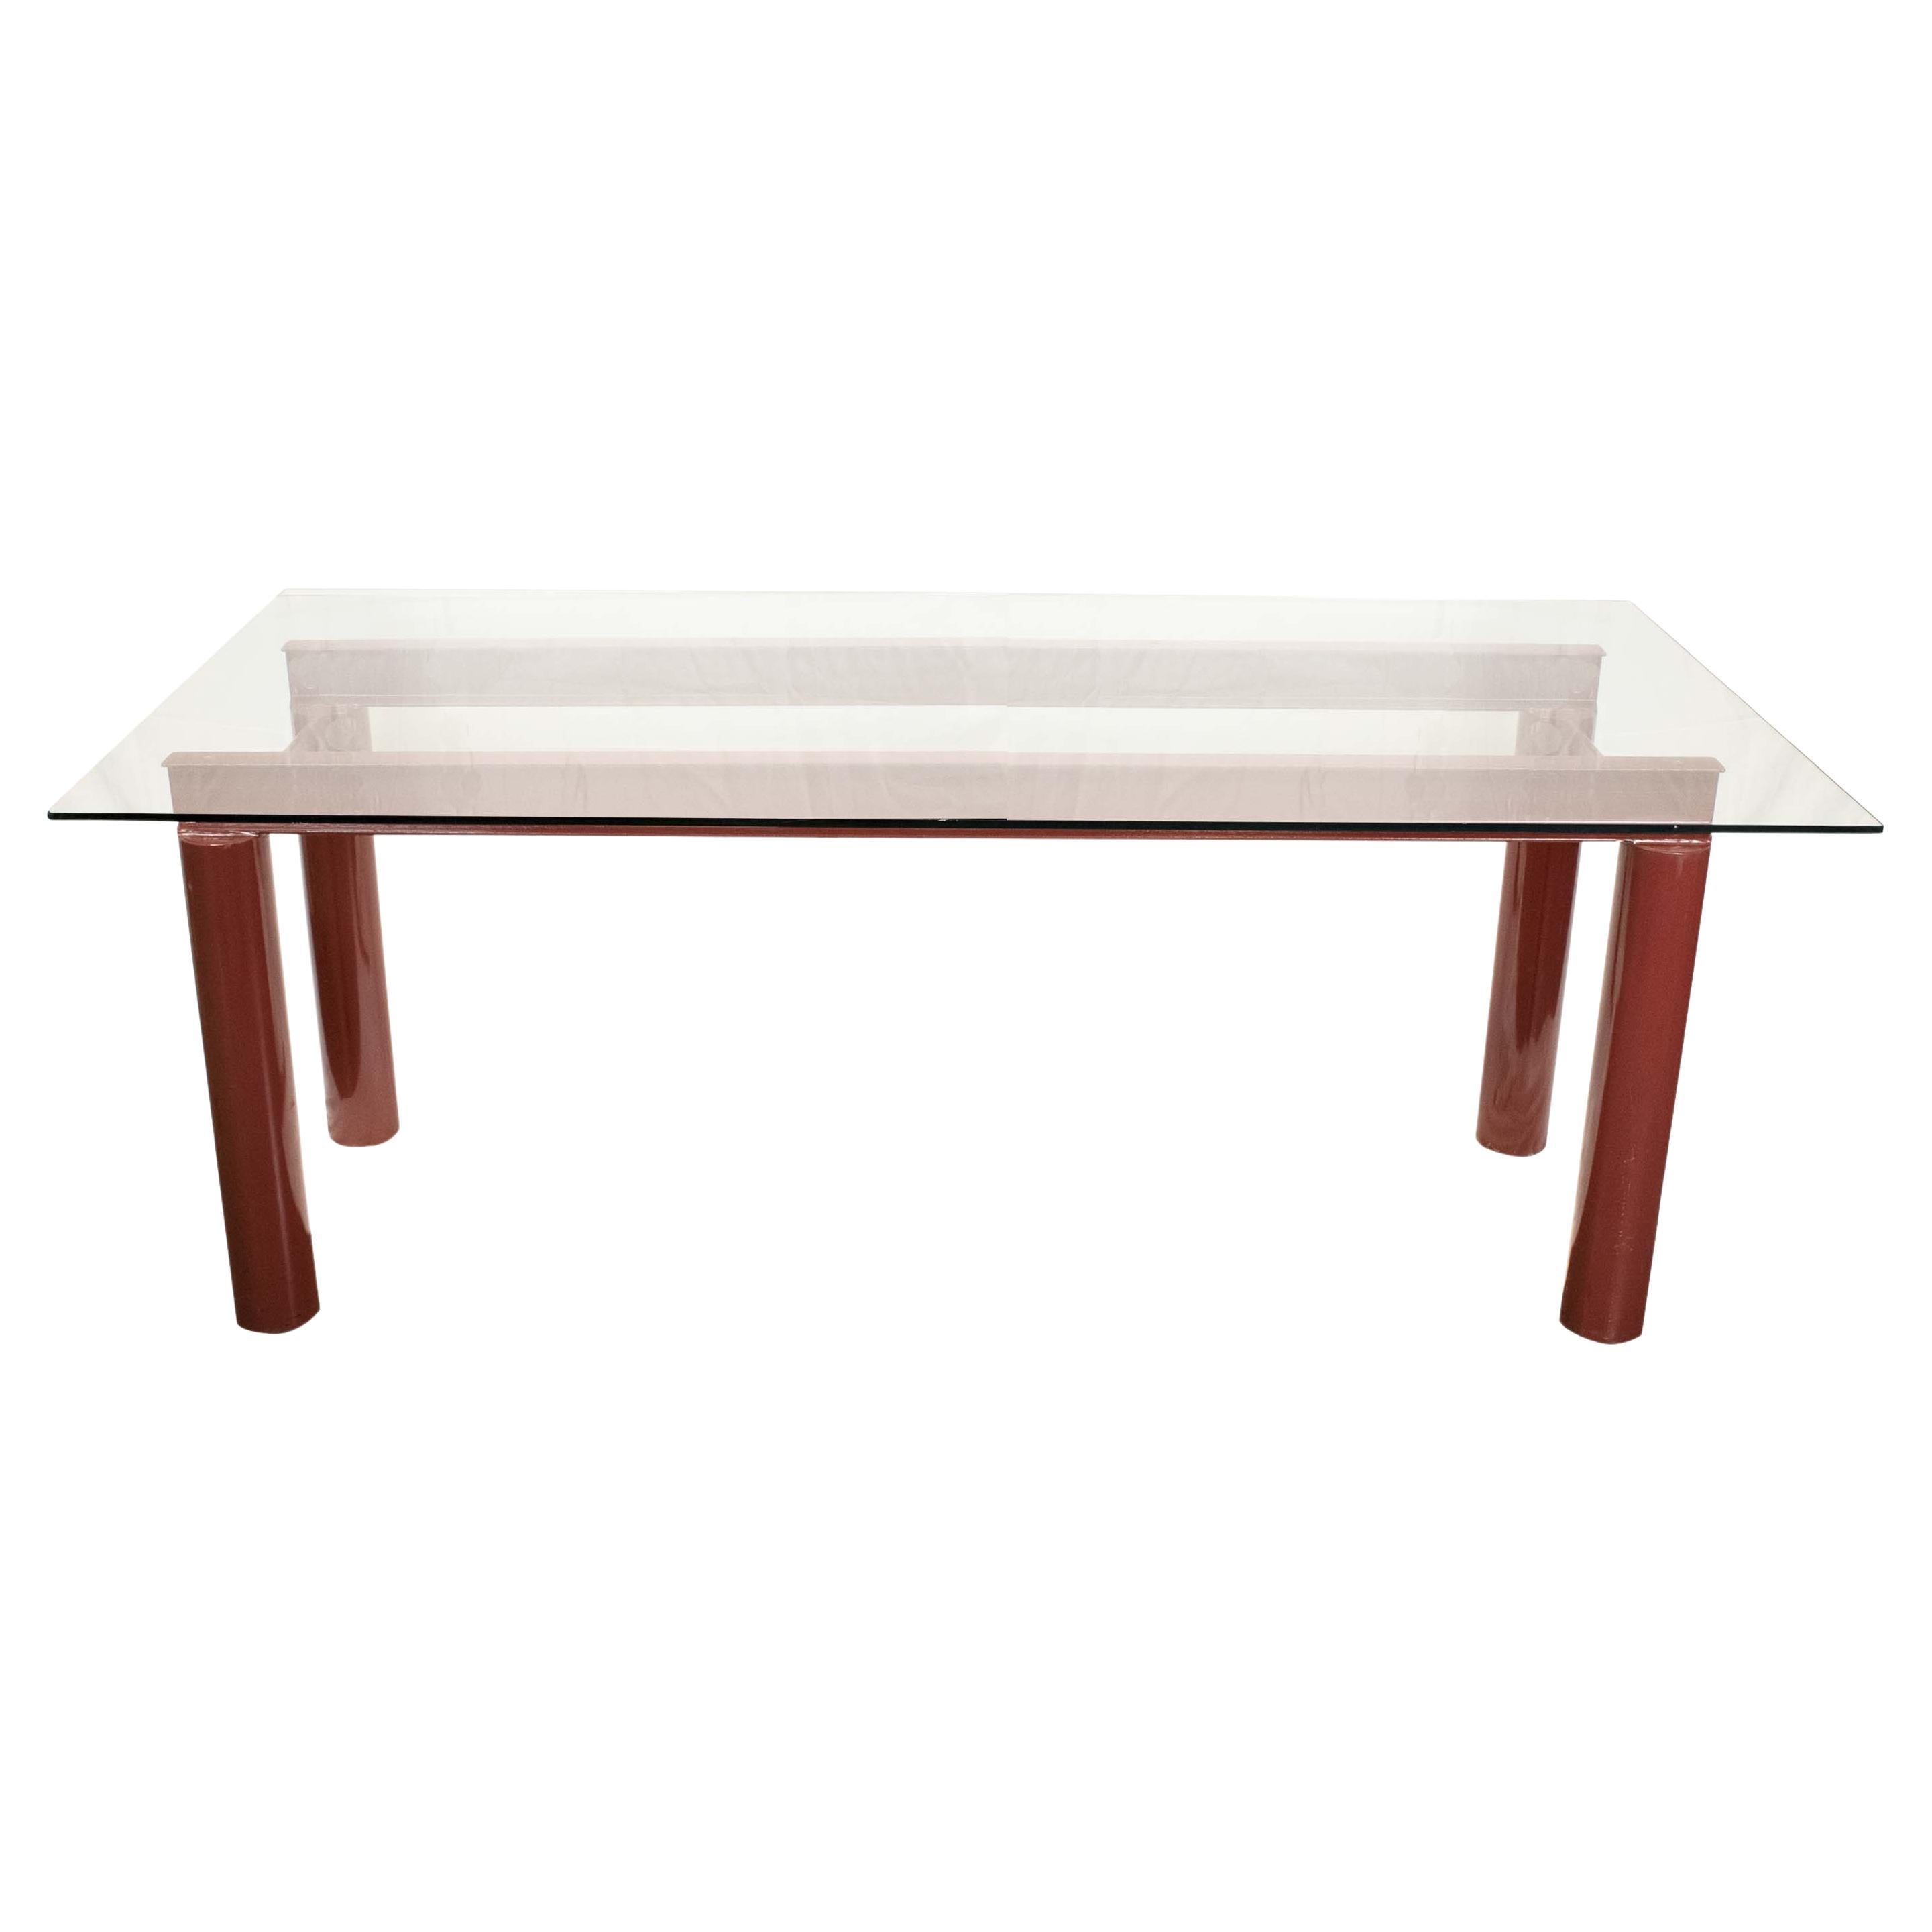 Modern Bourdeaux Steel Dining Table with Glass Top 187 x 89 cm, Italia, 1970 For Sale